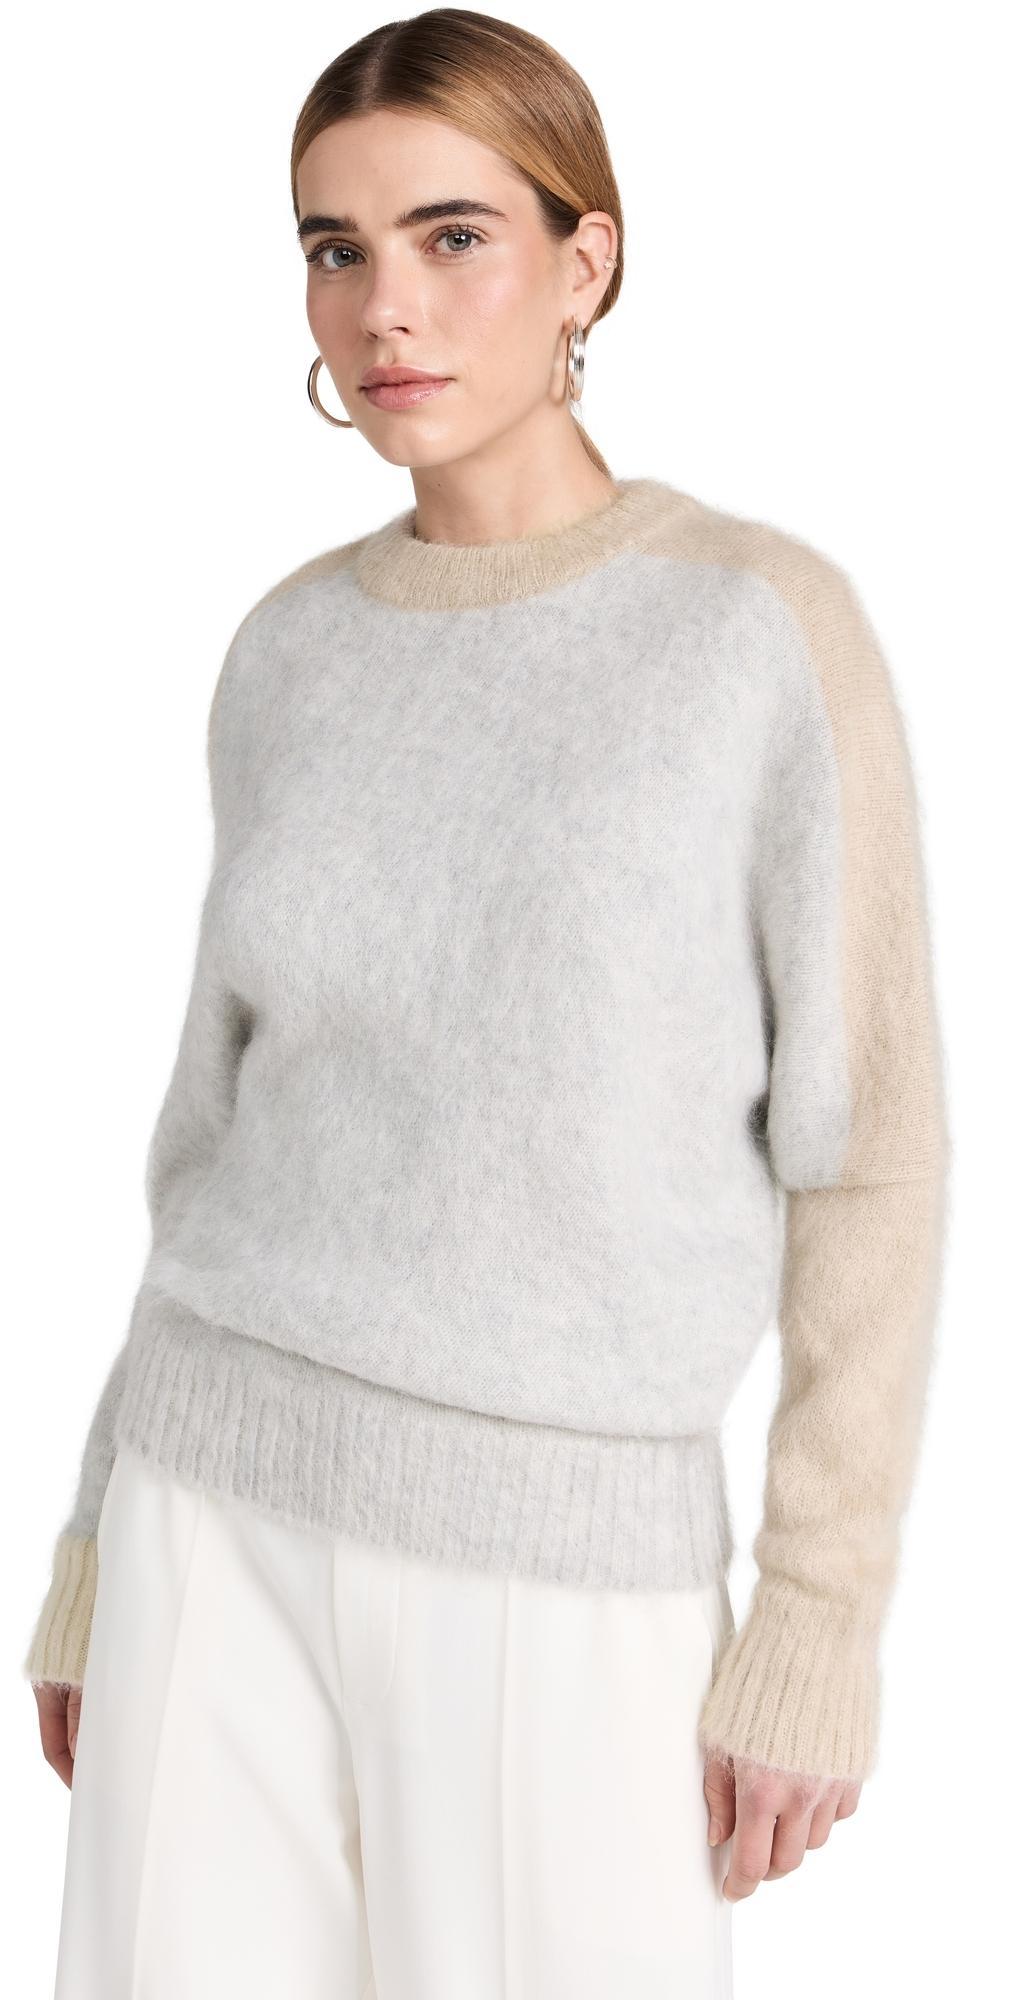 Proenza Schouler Colorblock Brushed Mohair Blend Sweater Product Image